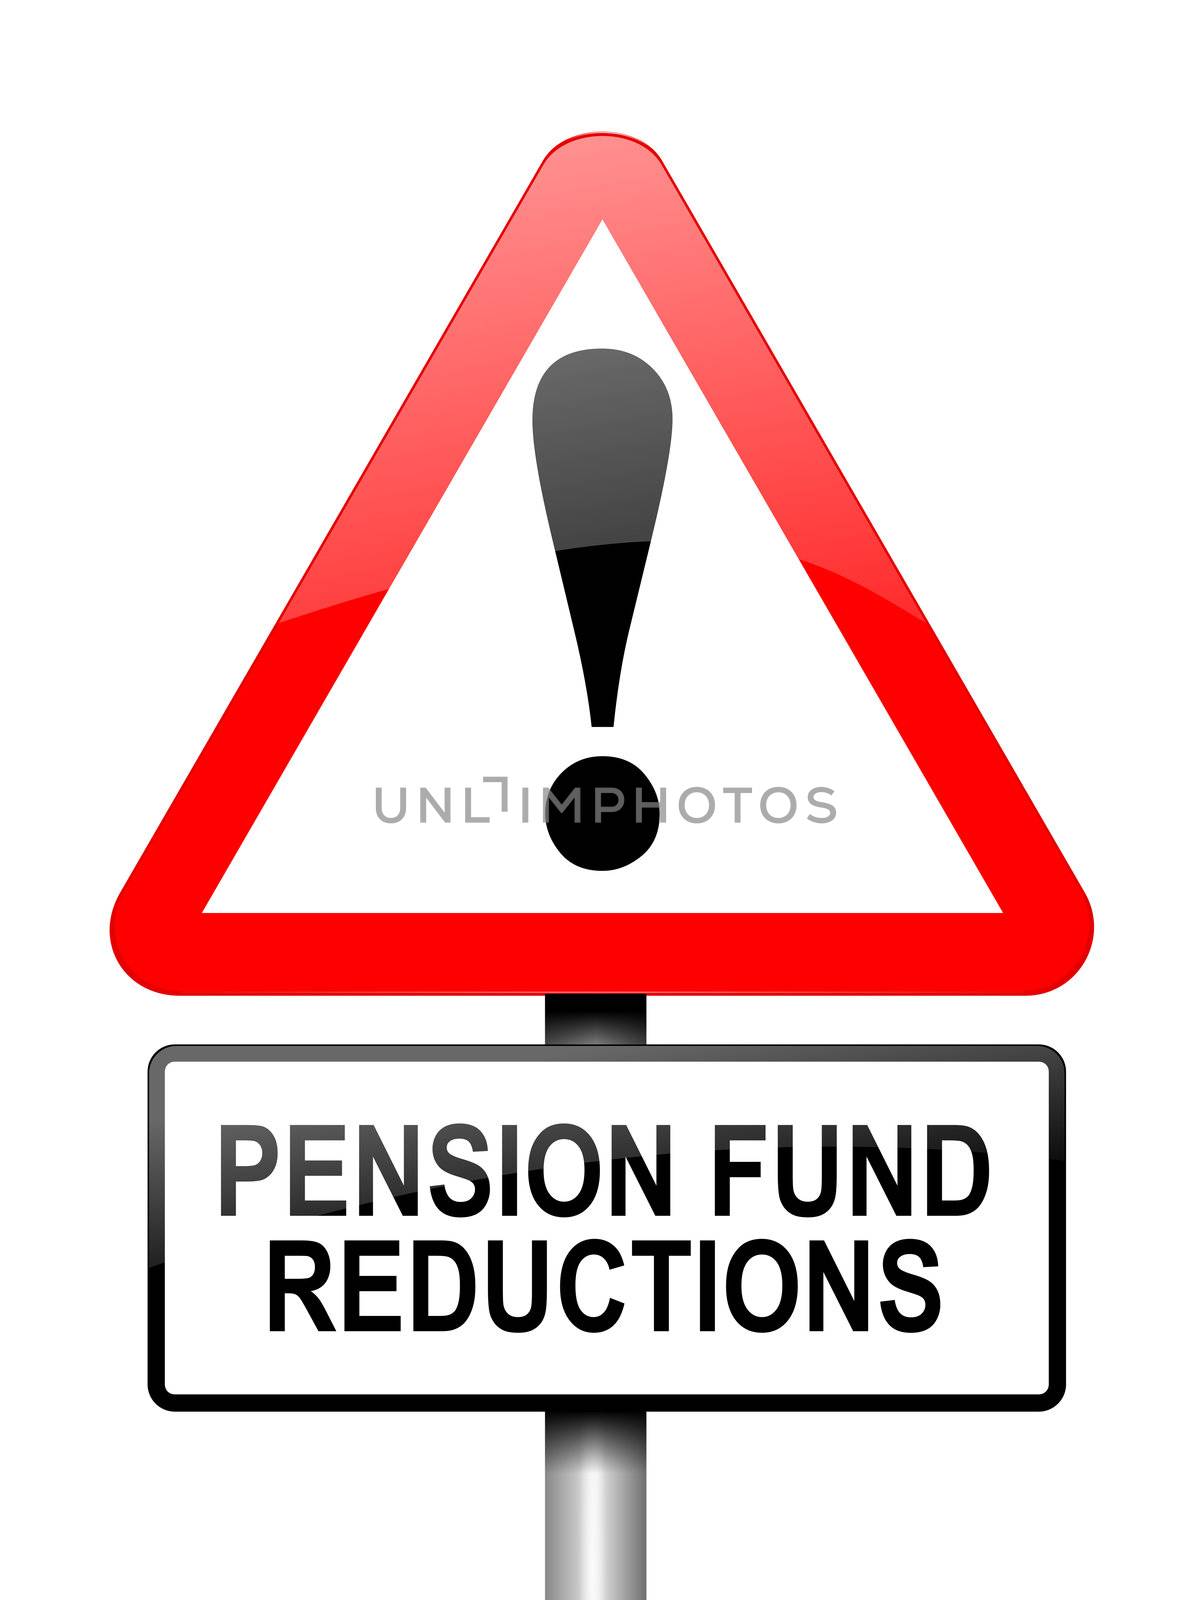 Illustration depicting red and white triangular warning road sign with a pension fund concept. White background.